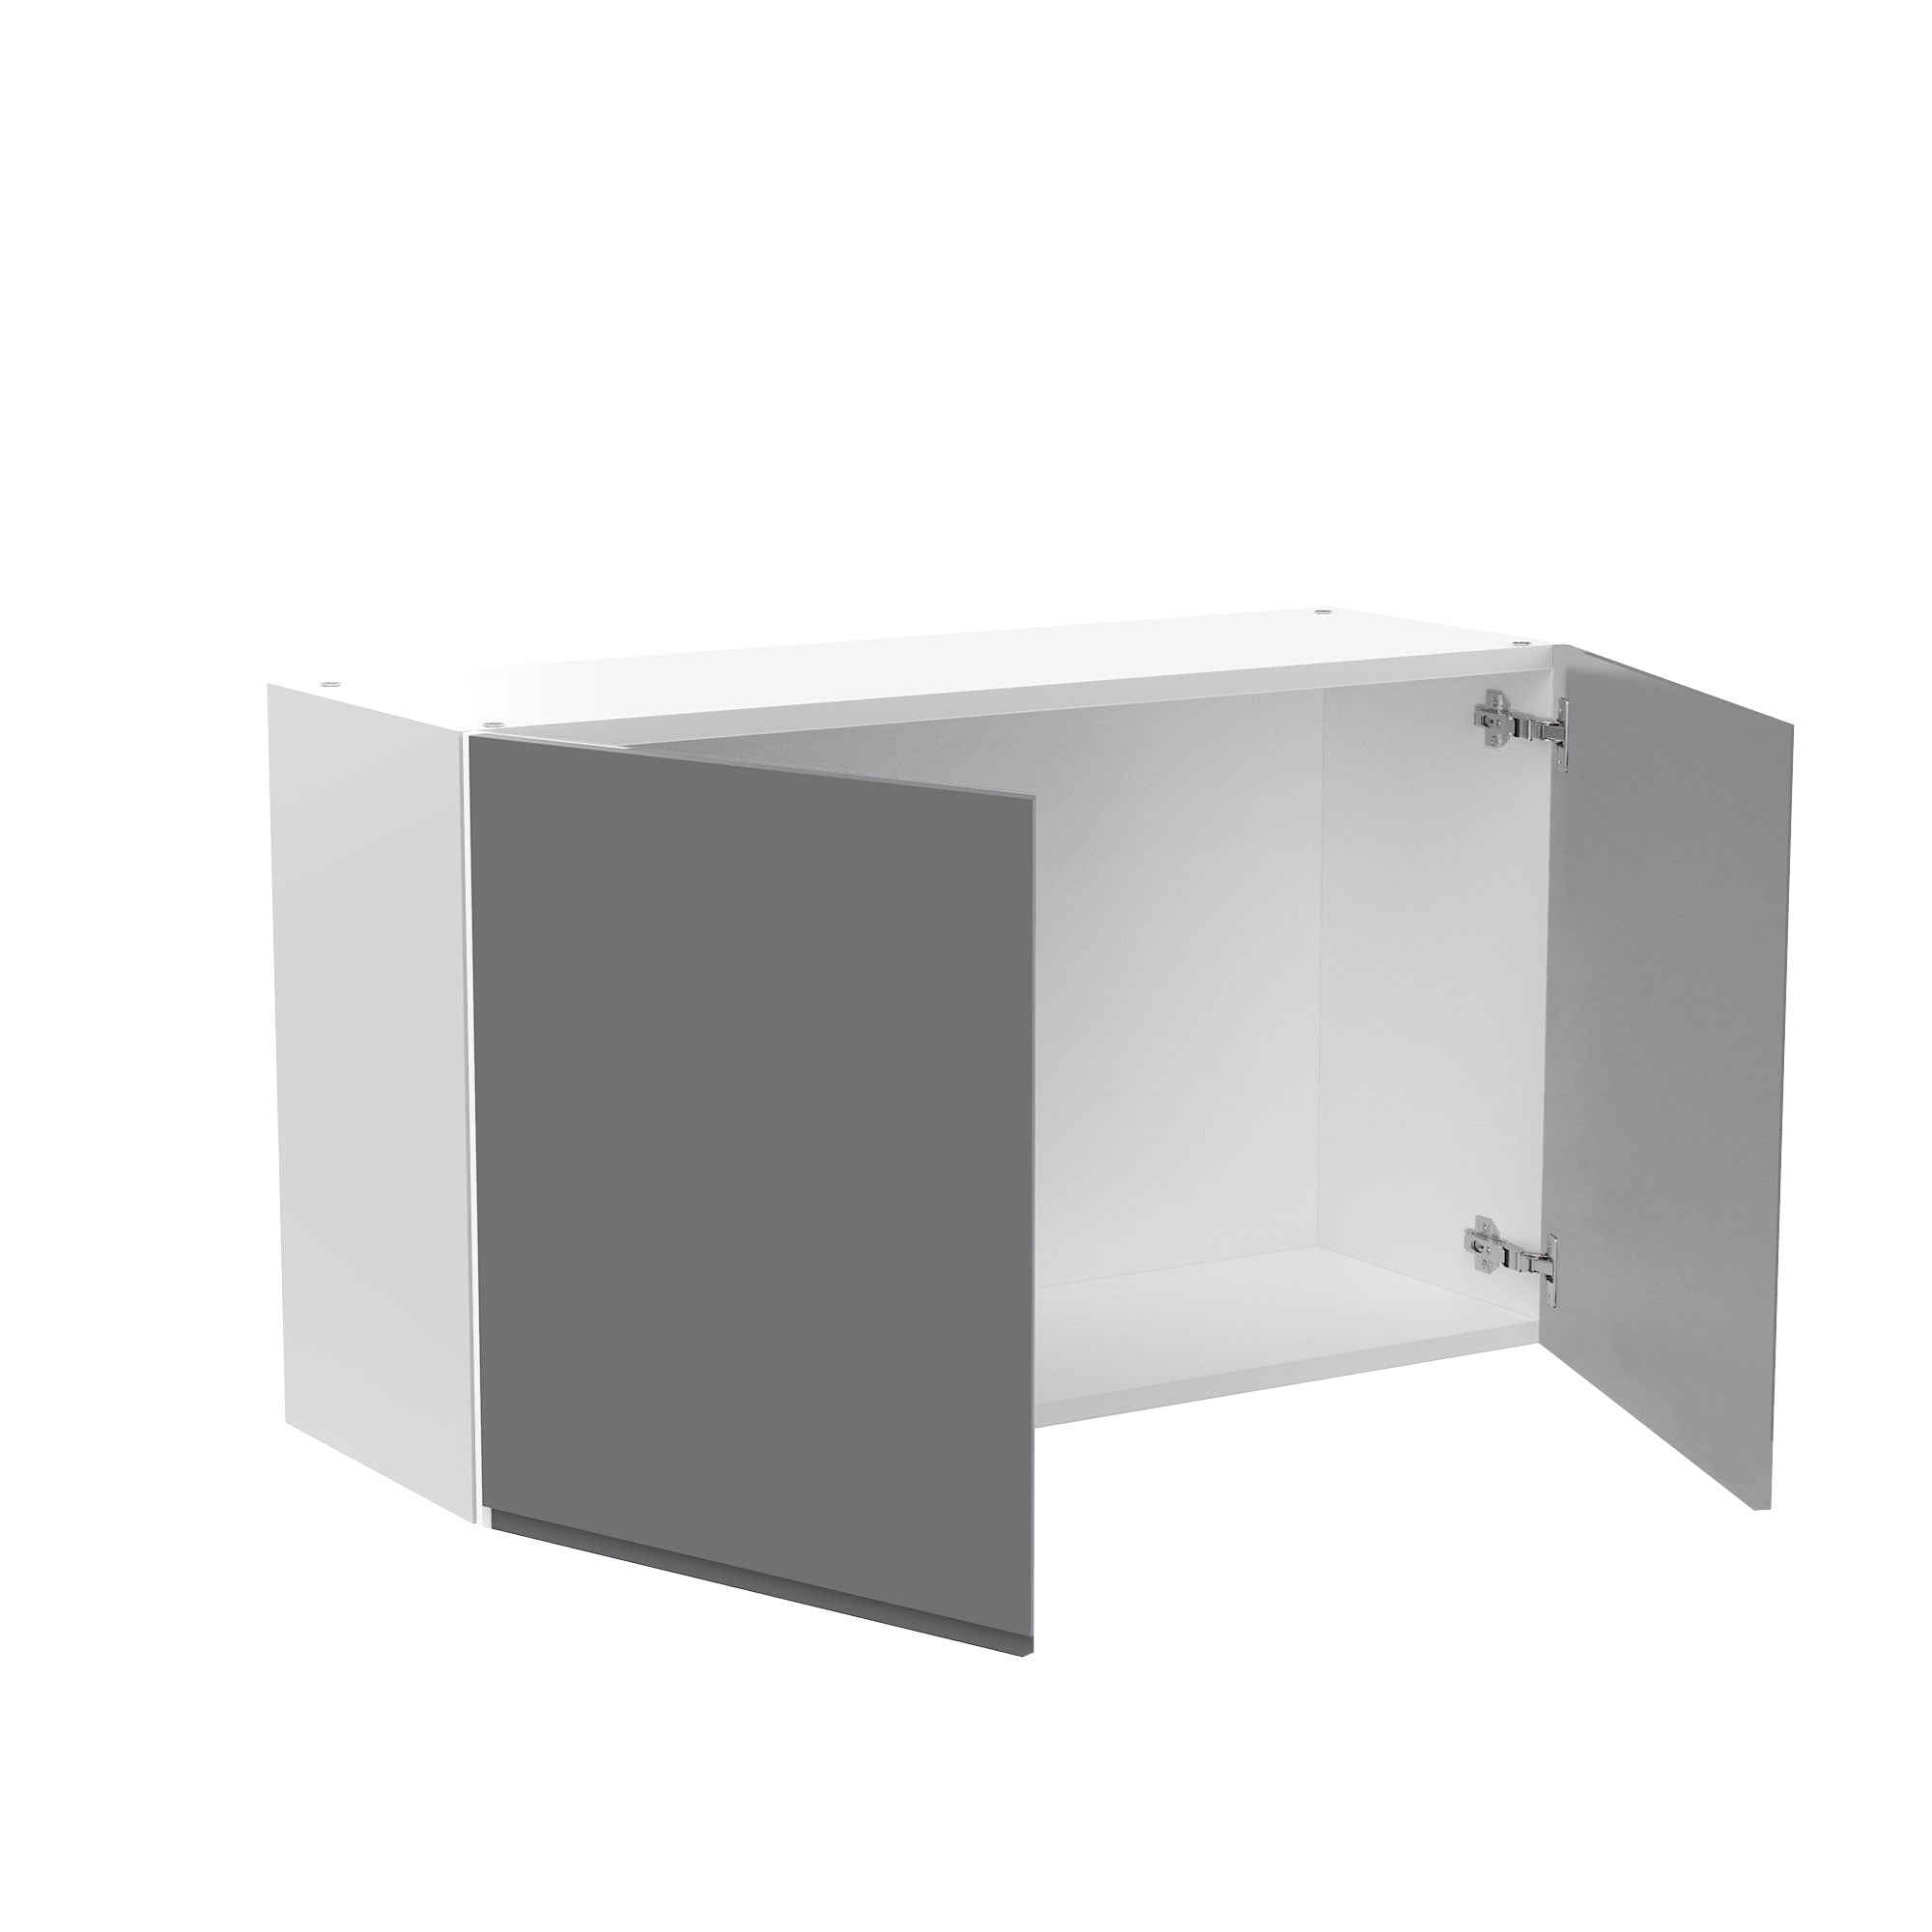 RTA - Lacquer Grey - Double Door Wall Cabinets | 36"W x 21"H x 12"D